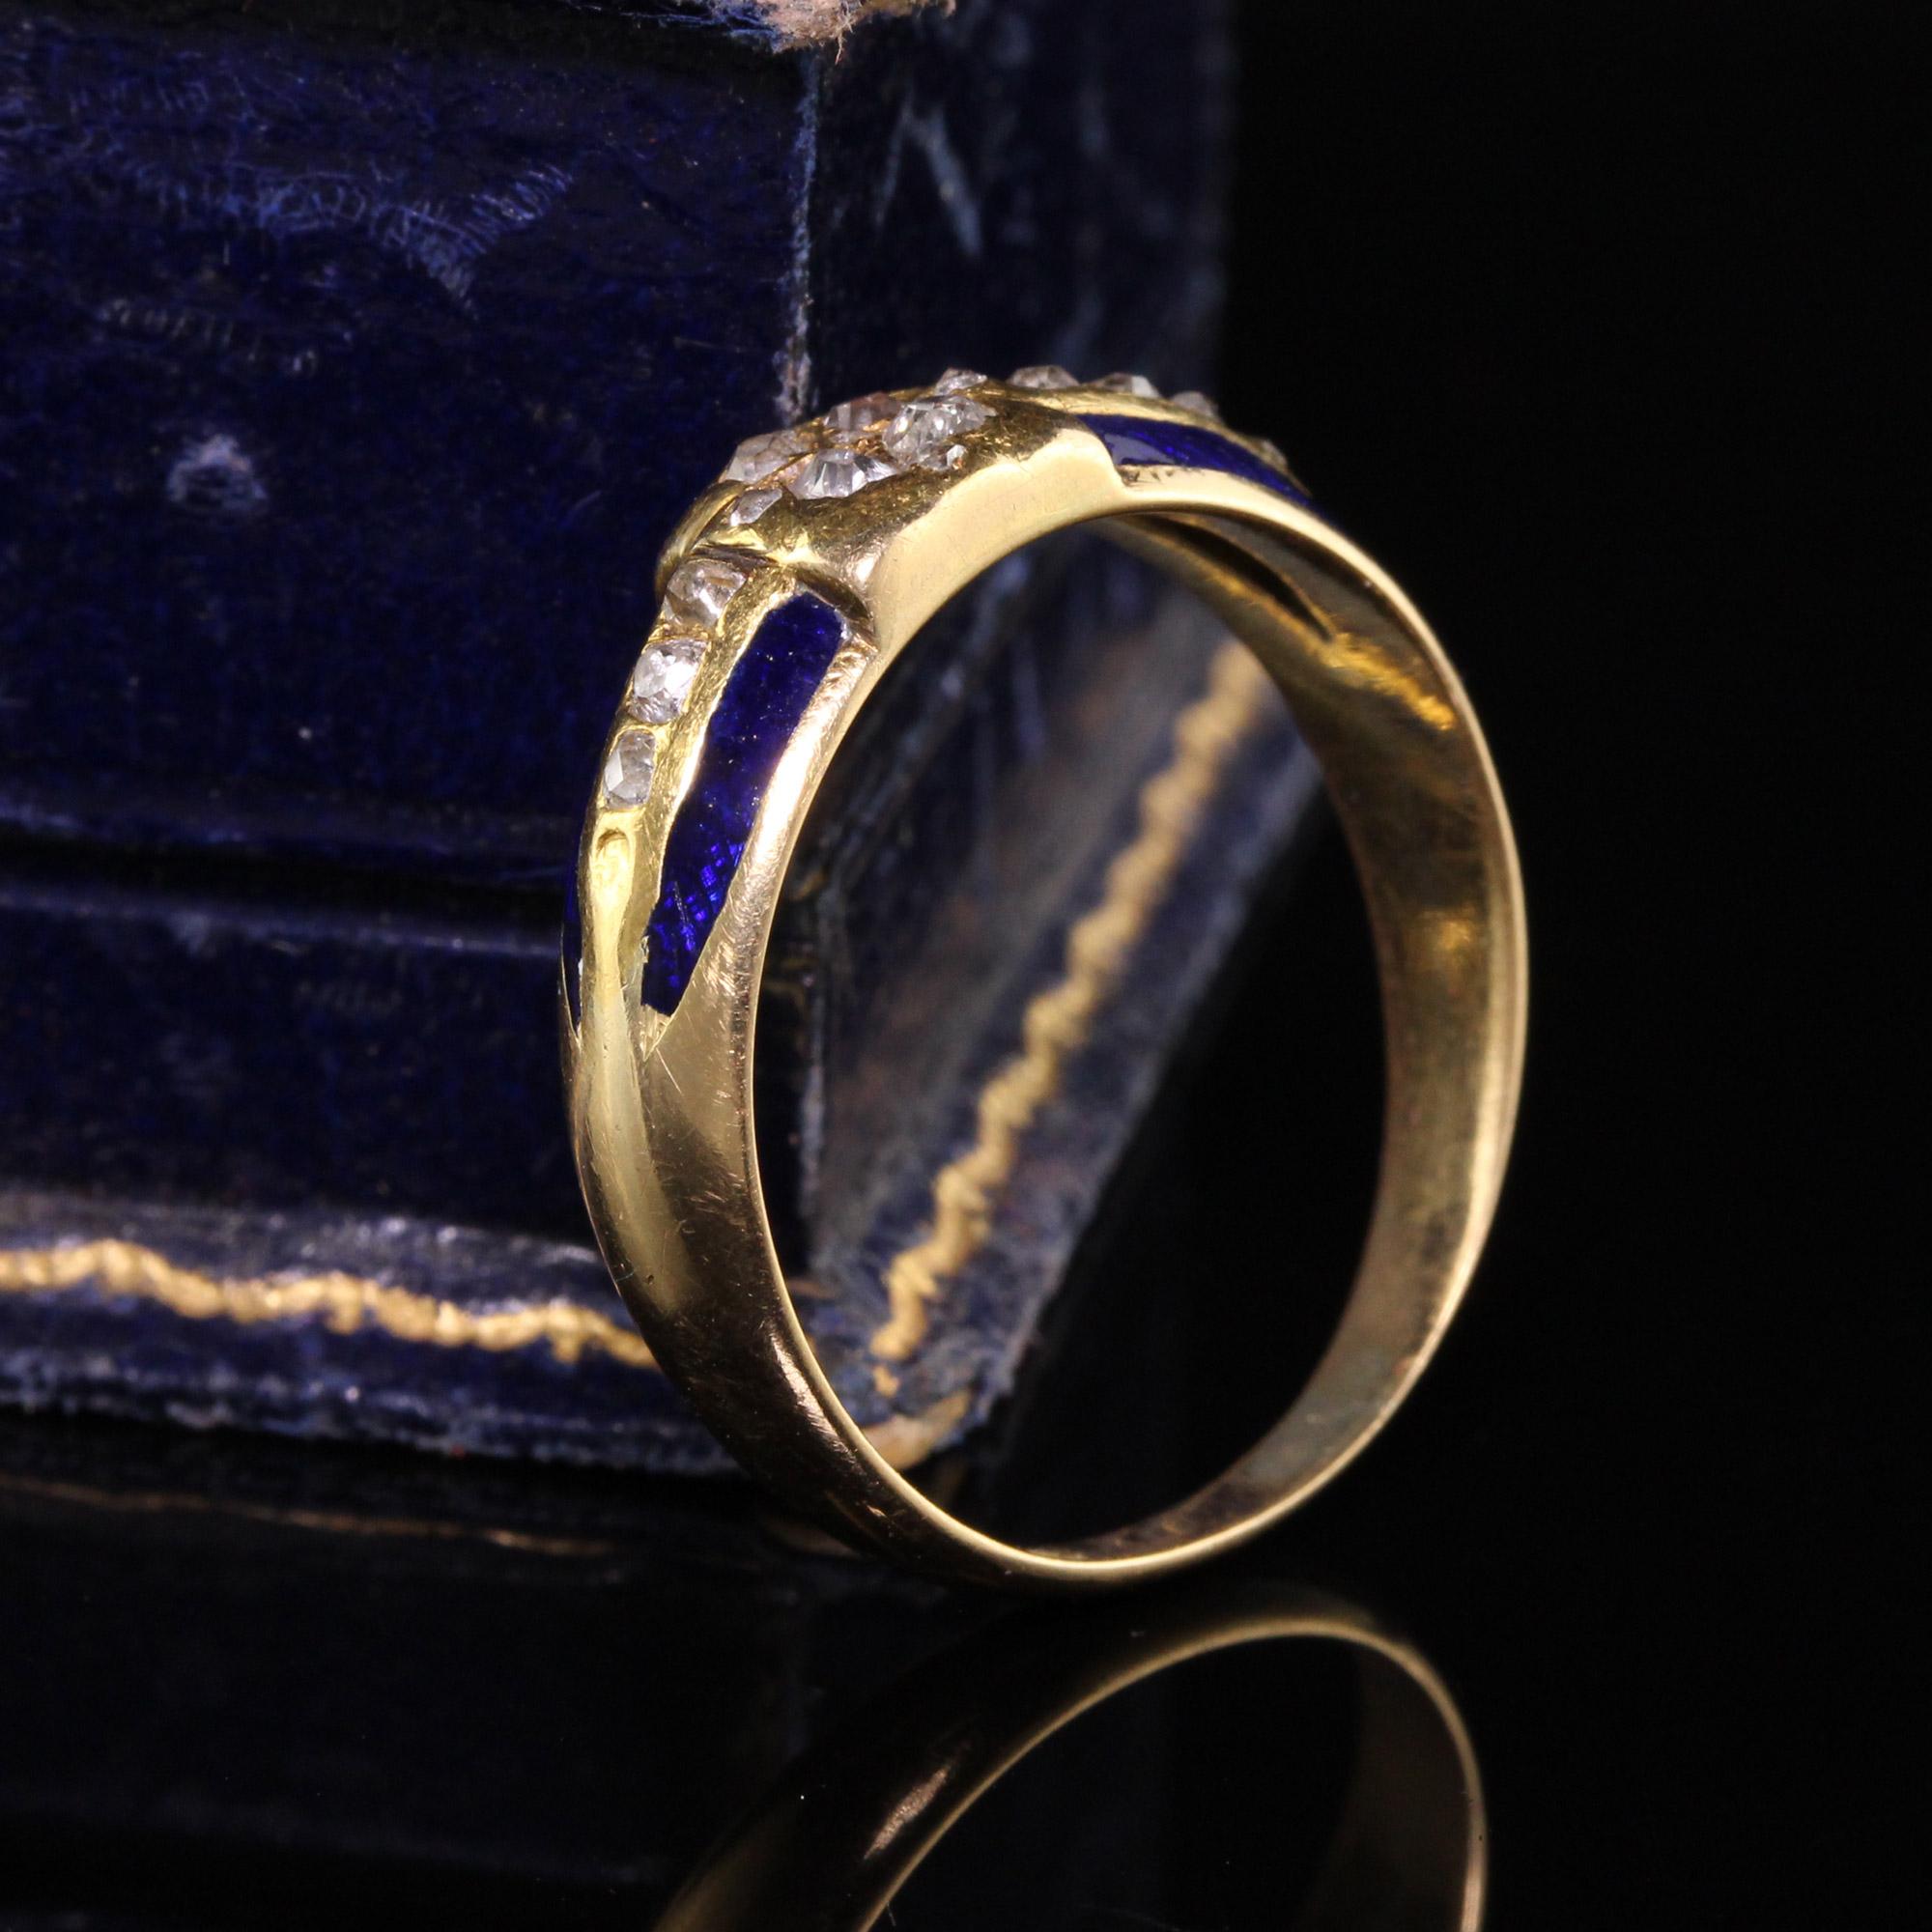 Magnificent Antique Art Deco 18K Yellow Gold Old Mine Cut Diamond Enamel Ring. The sides of the ring have blue enamel and the diamonds on the ring are chunky old mine cut stones in different shapes. A very unique ring.

#R0783

Metal: 18K Yellow